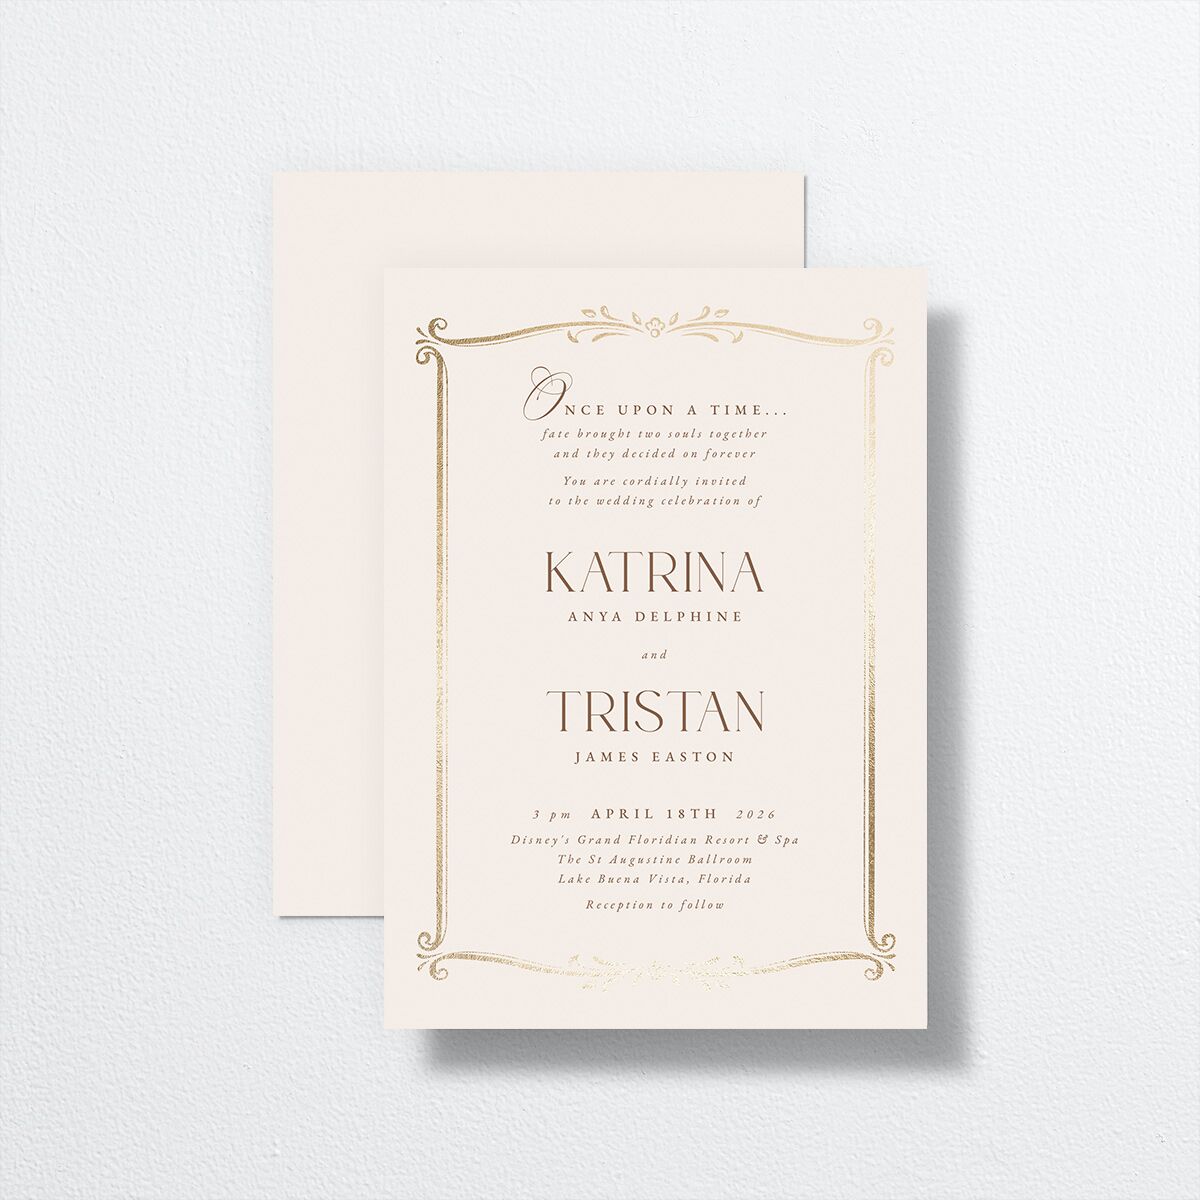 Fairytale Frame Wedding Invitations front-and-back in white